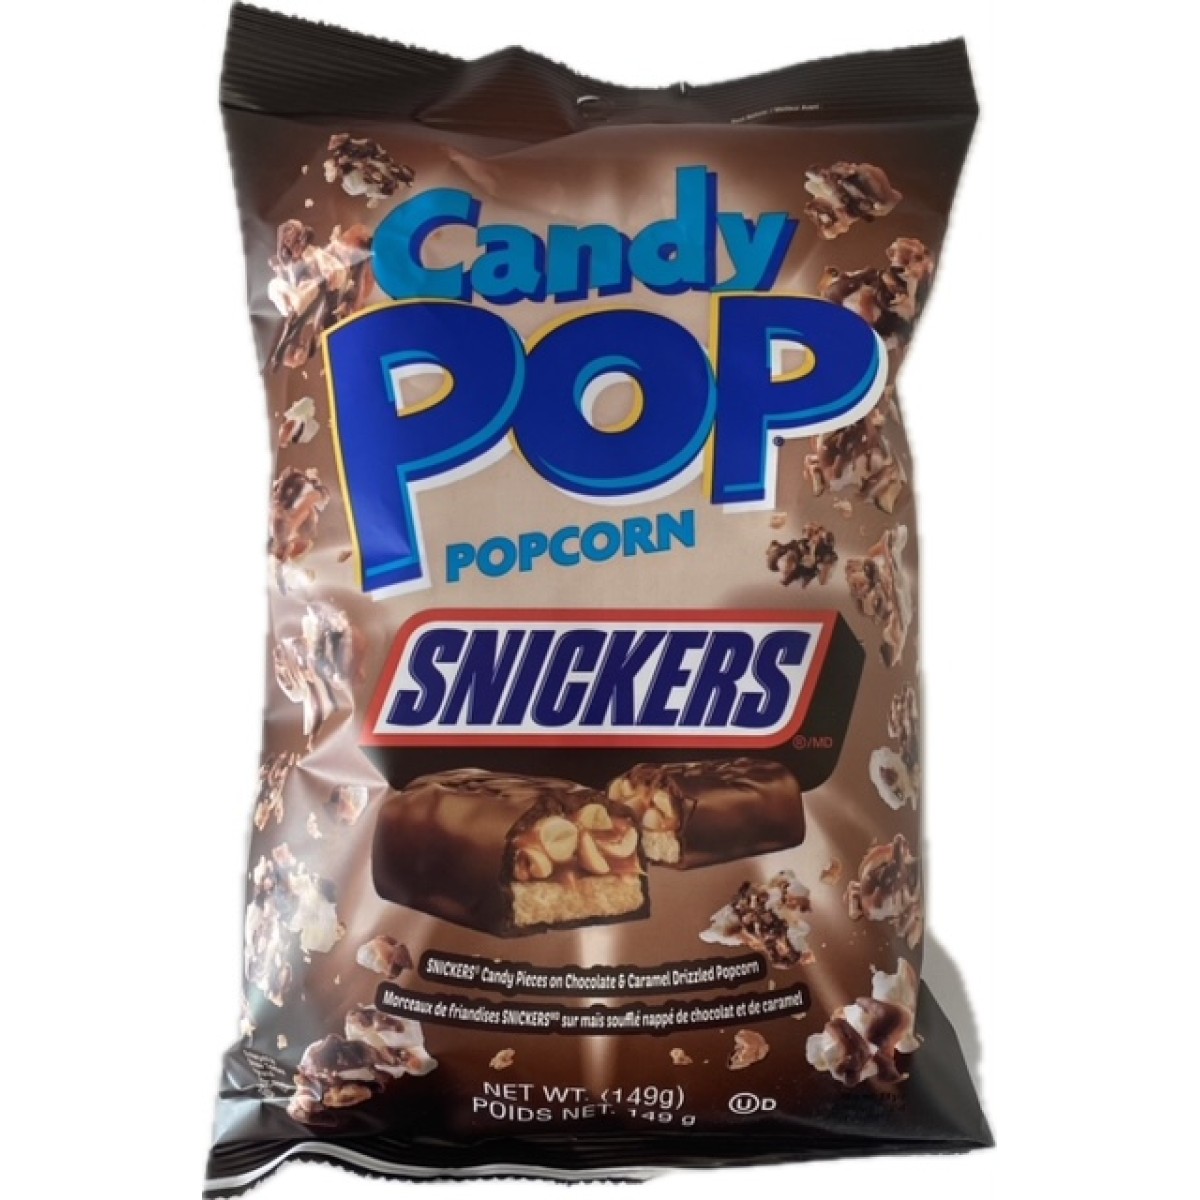 Candy popcorn snickers